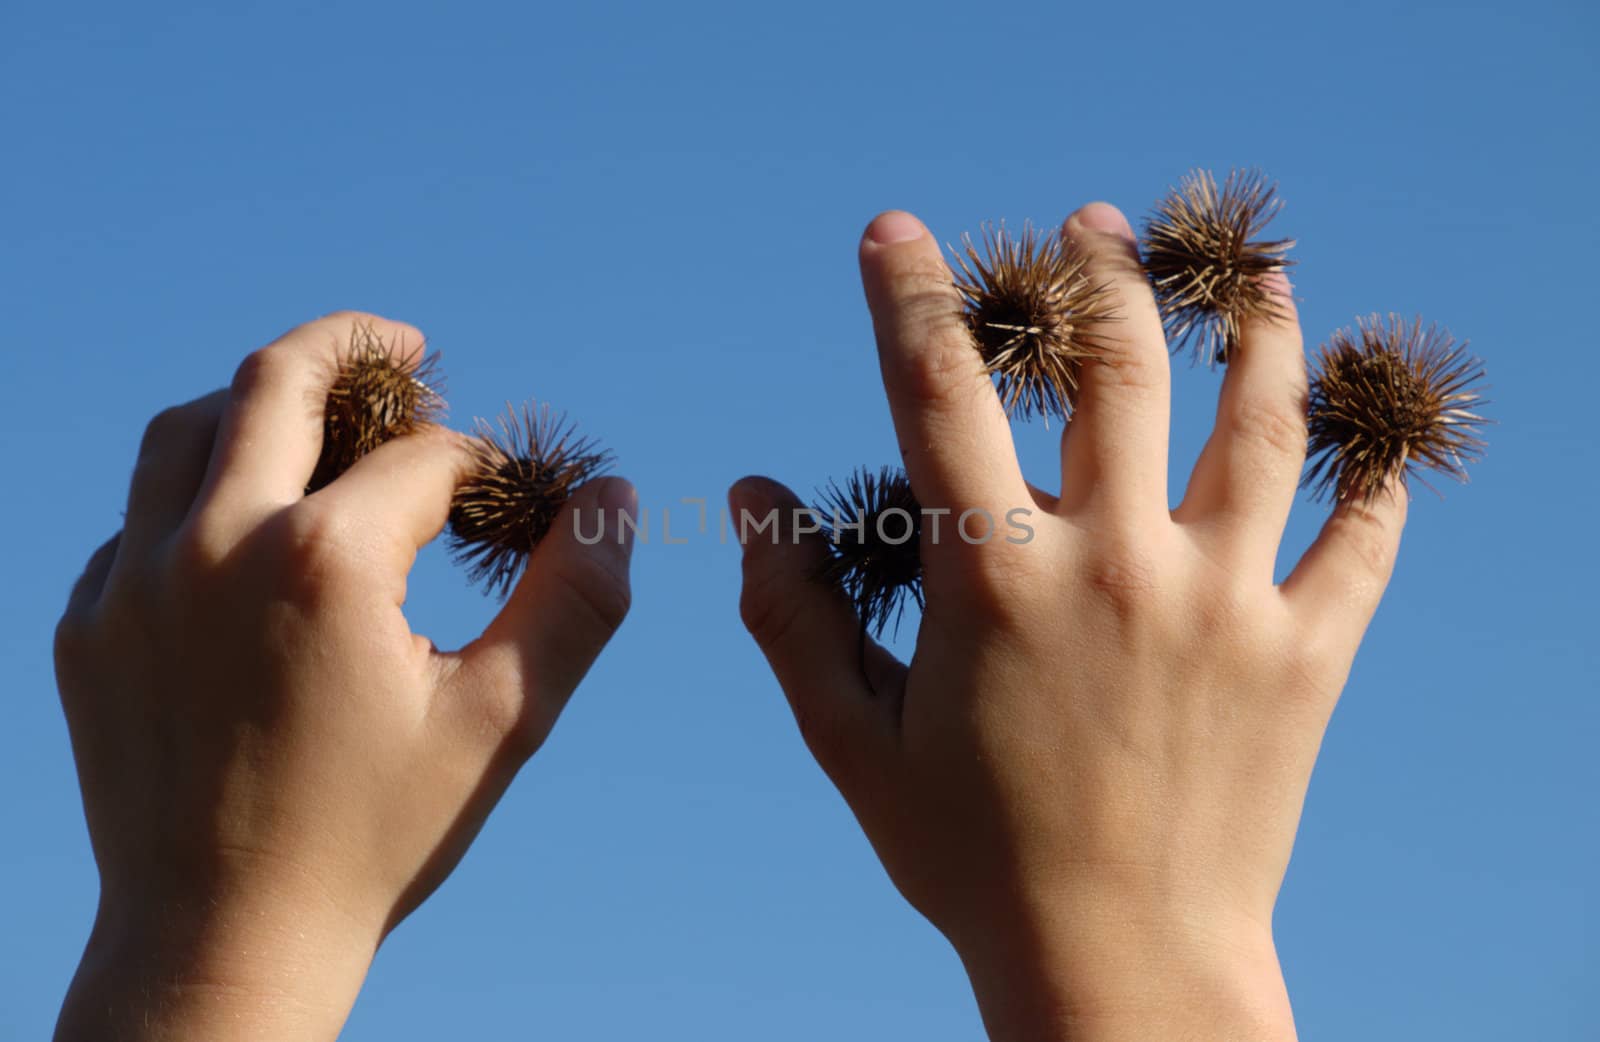 the thistles in child hands by renales